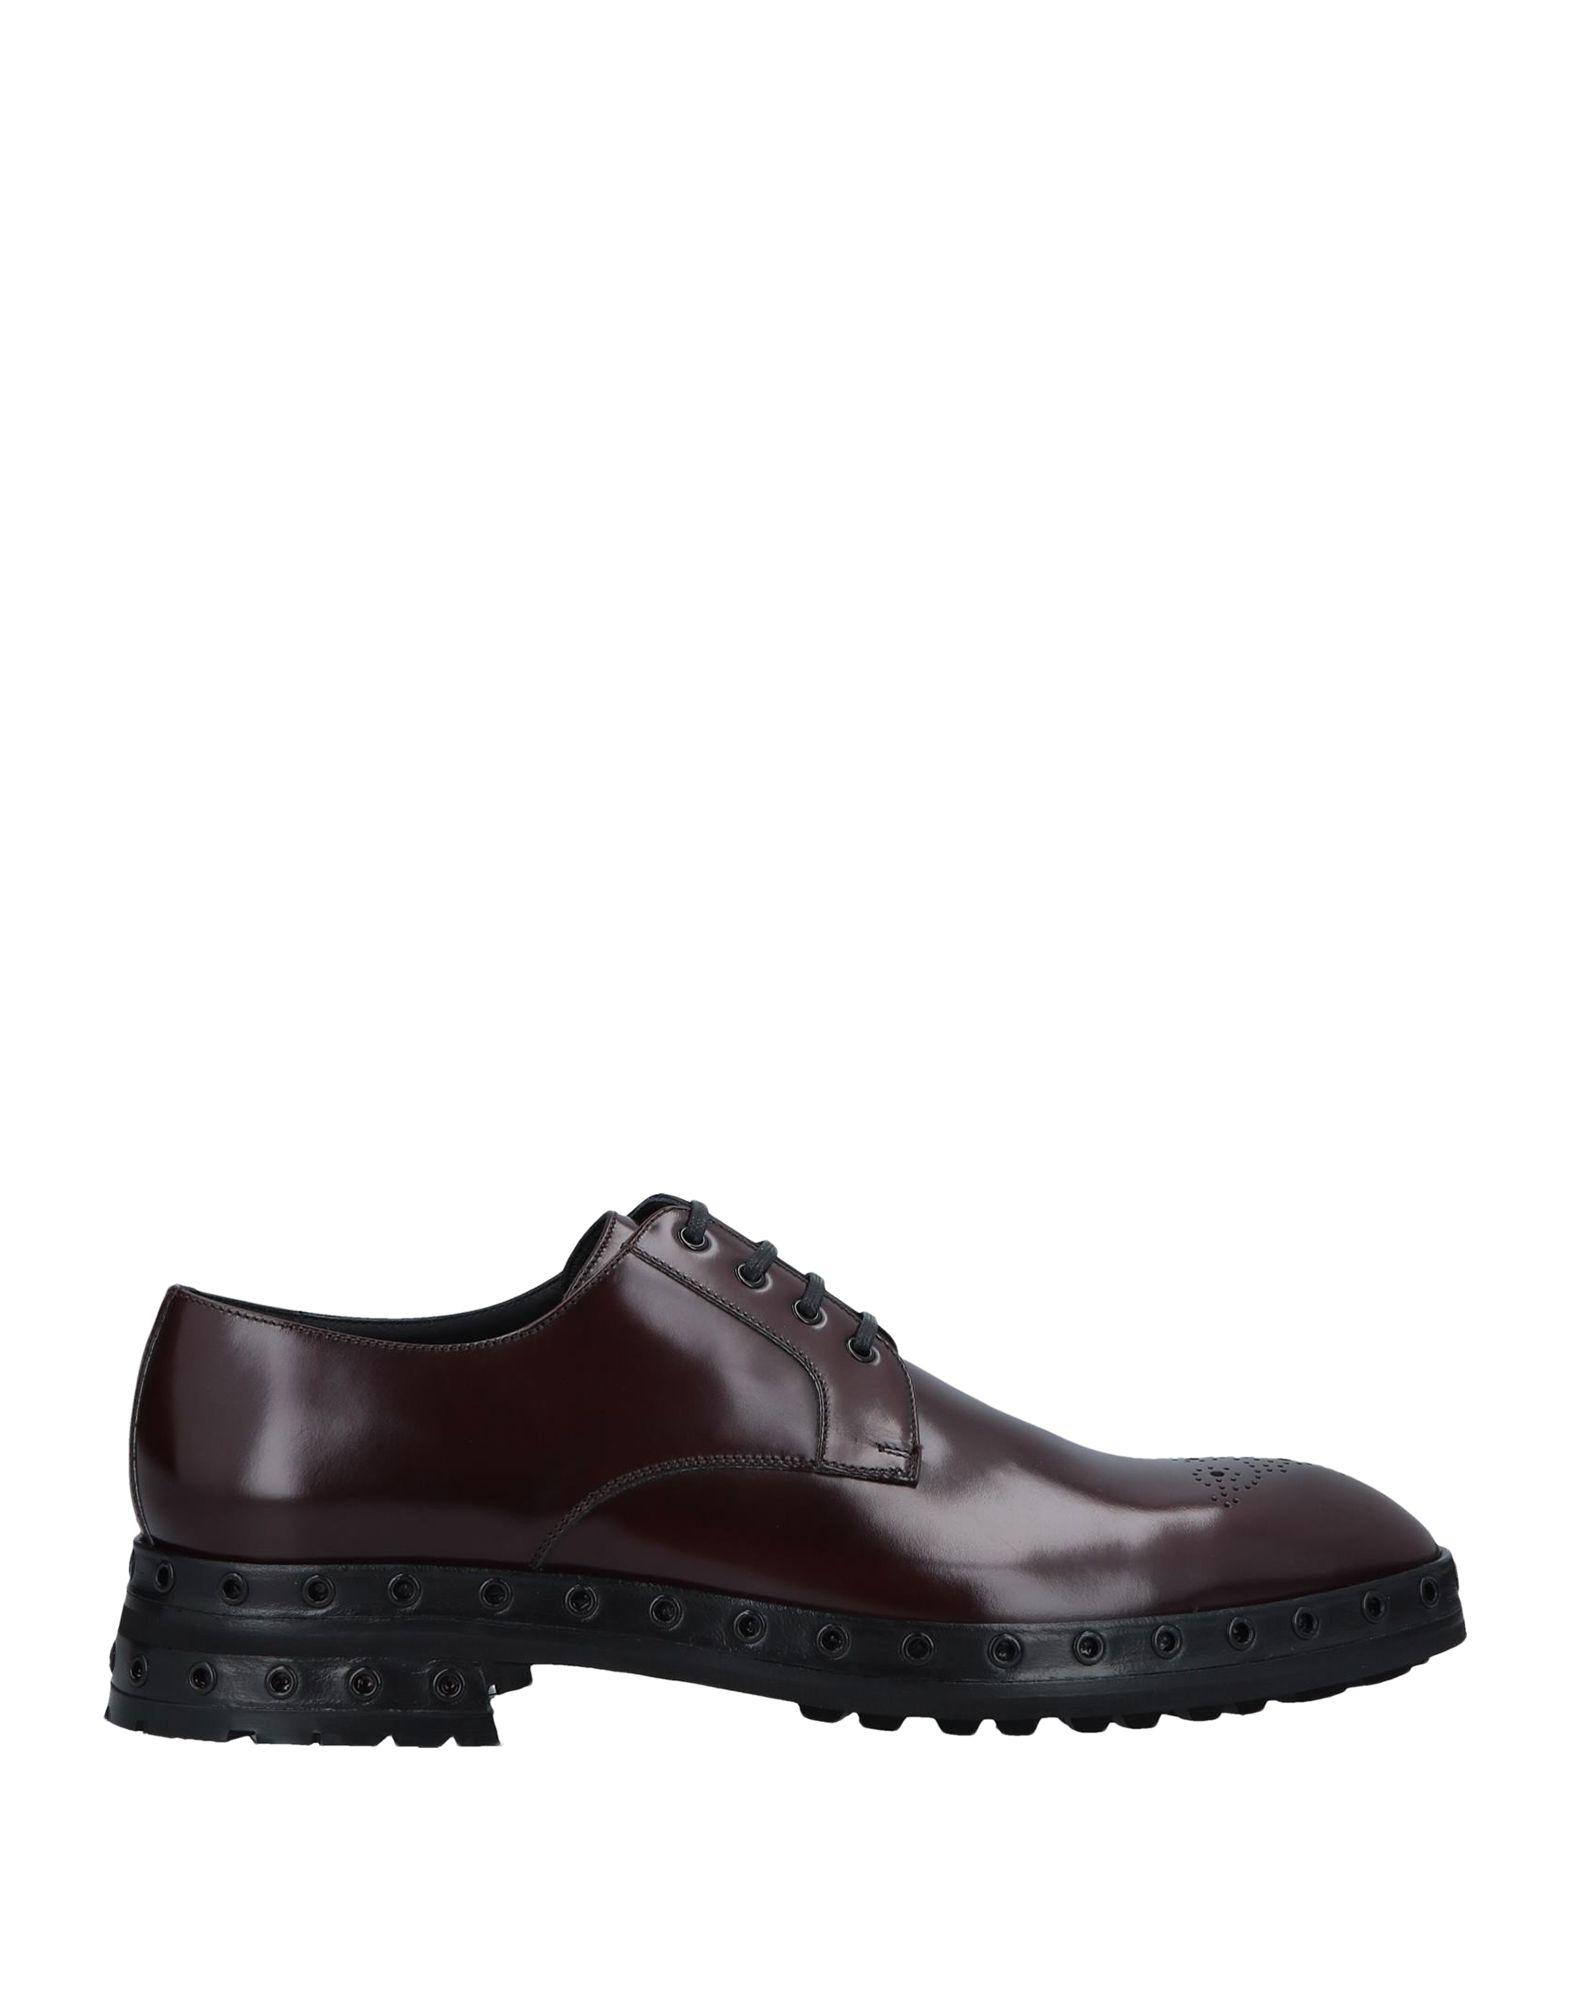 Dolce & Gabbana Lace-up Shoe in Brown for Men - Lyst